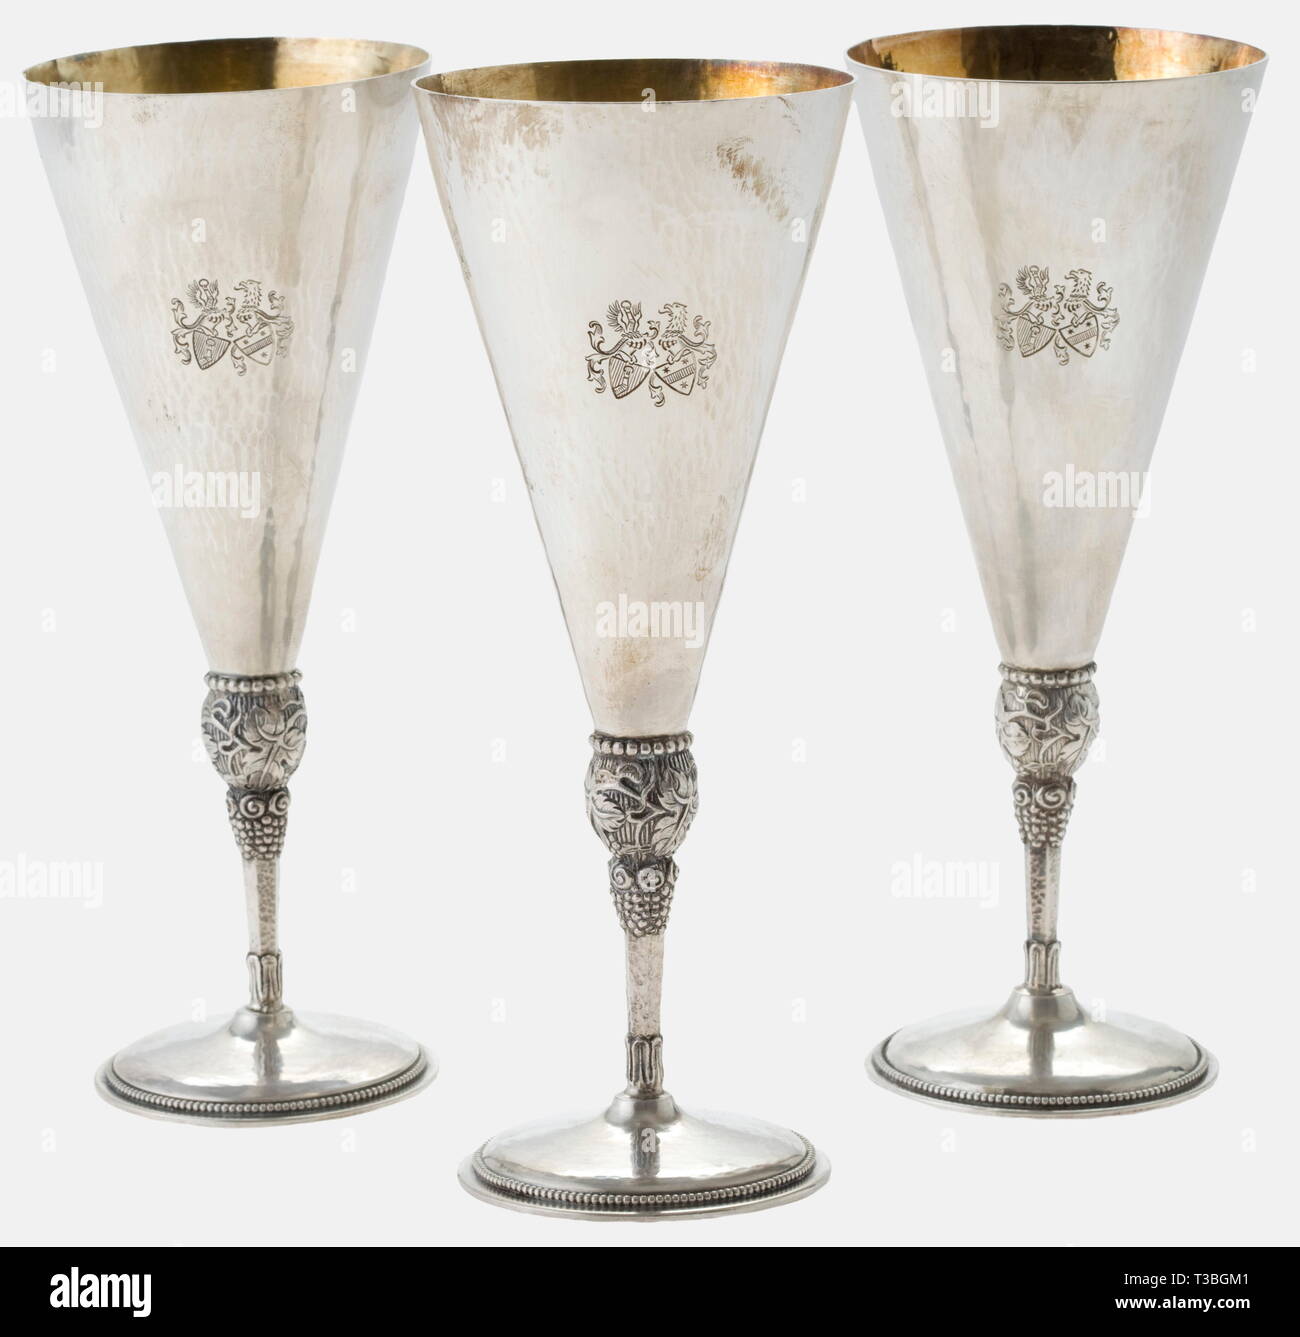 Hermann Göring and Emmy Sonnemann, three silver goblets, wedding gifts for the couple 1935 See previous lot. Height of each goblet 18 cm, weight between 170 and 174 g. historic, historical, 1930s, 20th century, NS, National Socialism, Nazism, Third Reich, German Reich, Germany, German, National Socialist, Nazi, Nazi period, fascism, fine arts, art, art object, art objects, artful, precious, collectible, collector's item, collectibles, collector's items, rarity, rarities, drinking glass, drinking glasses, vessel, vessels, Editorial-Use-Only Stock Photo